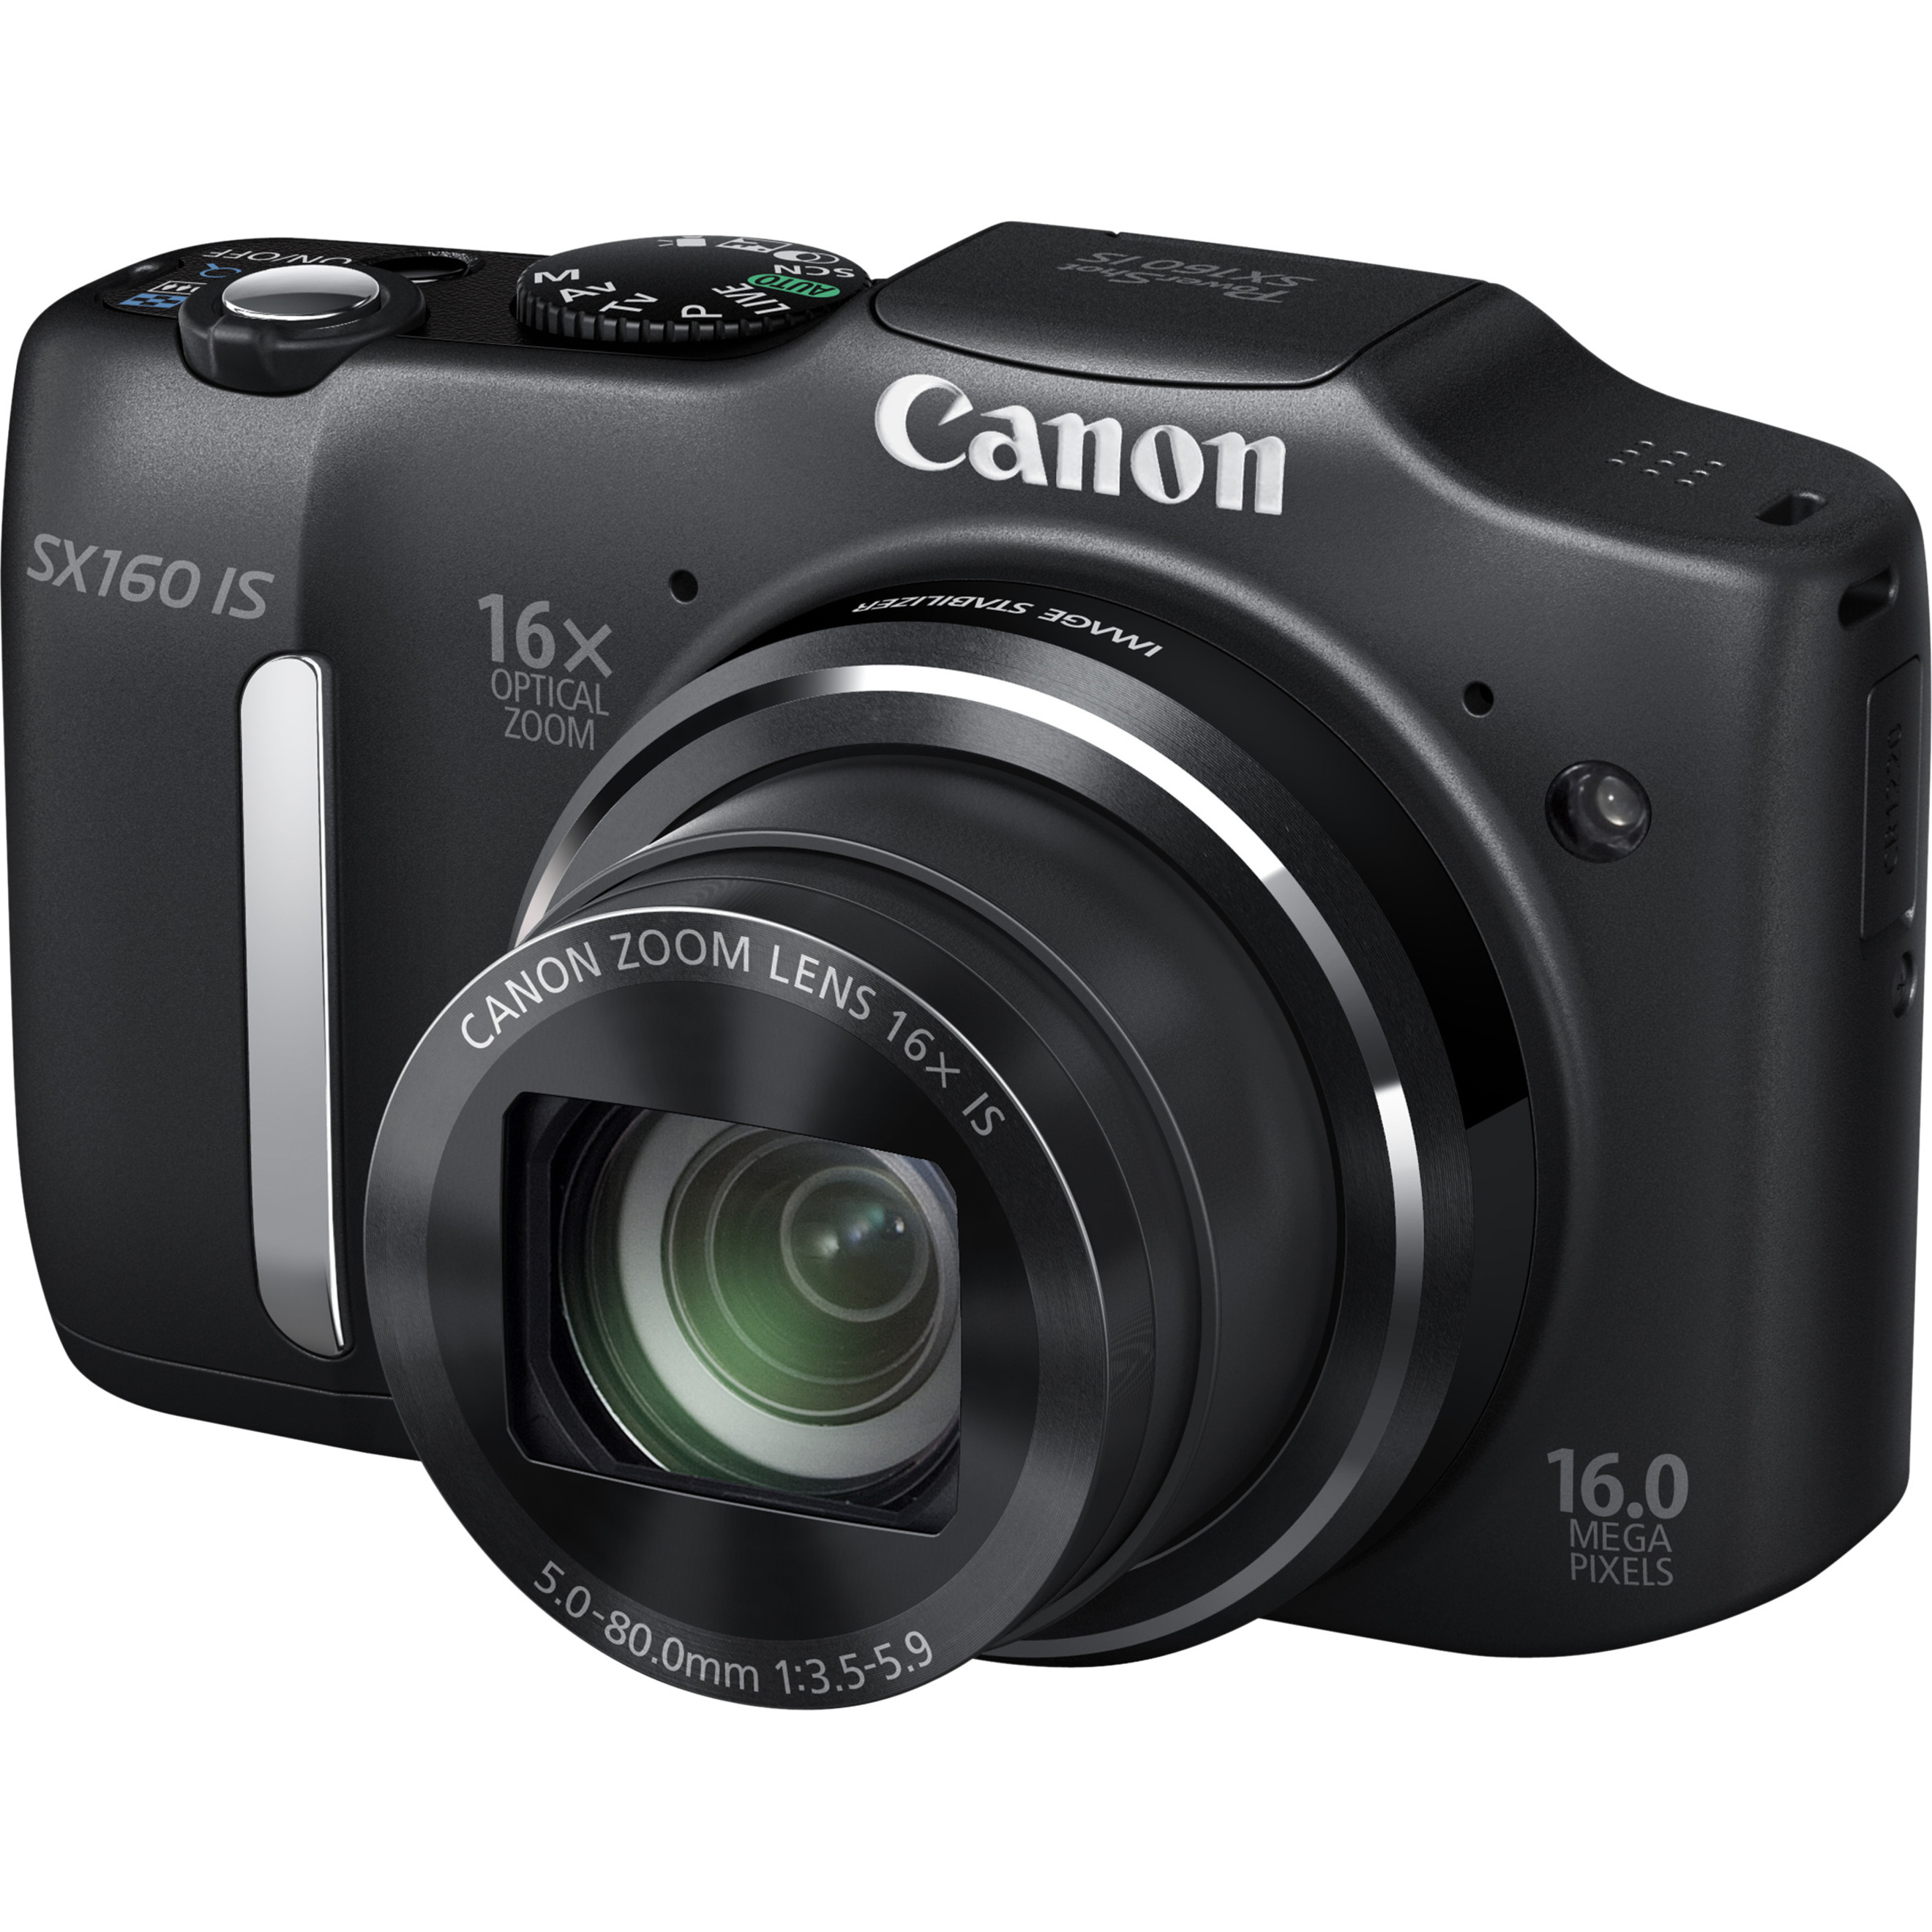 Canon PowerShot SX160 IS 16 Megapixel Compact Camera, Black - image 3 of 4